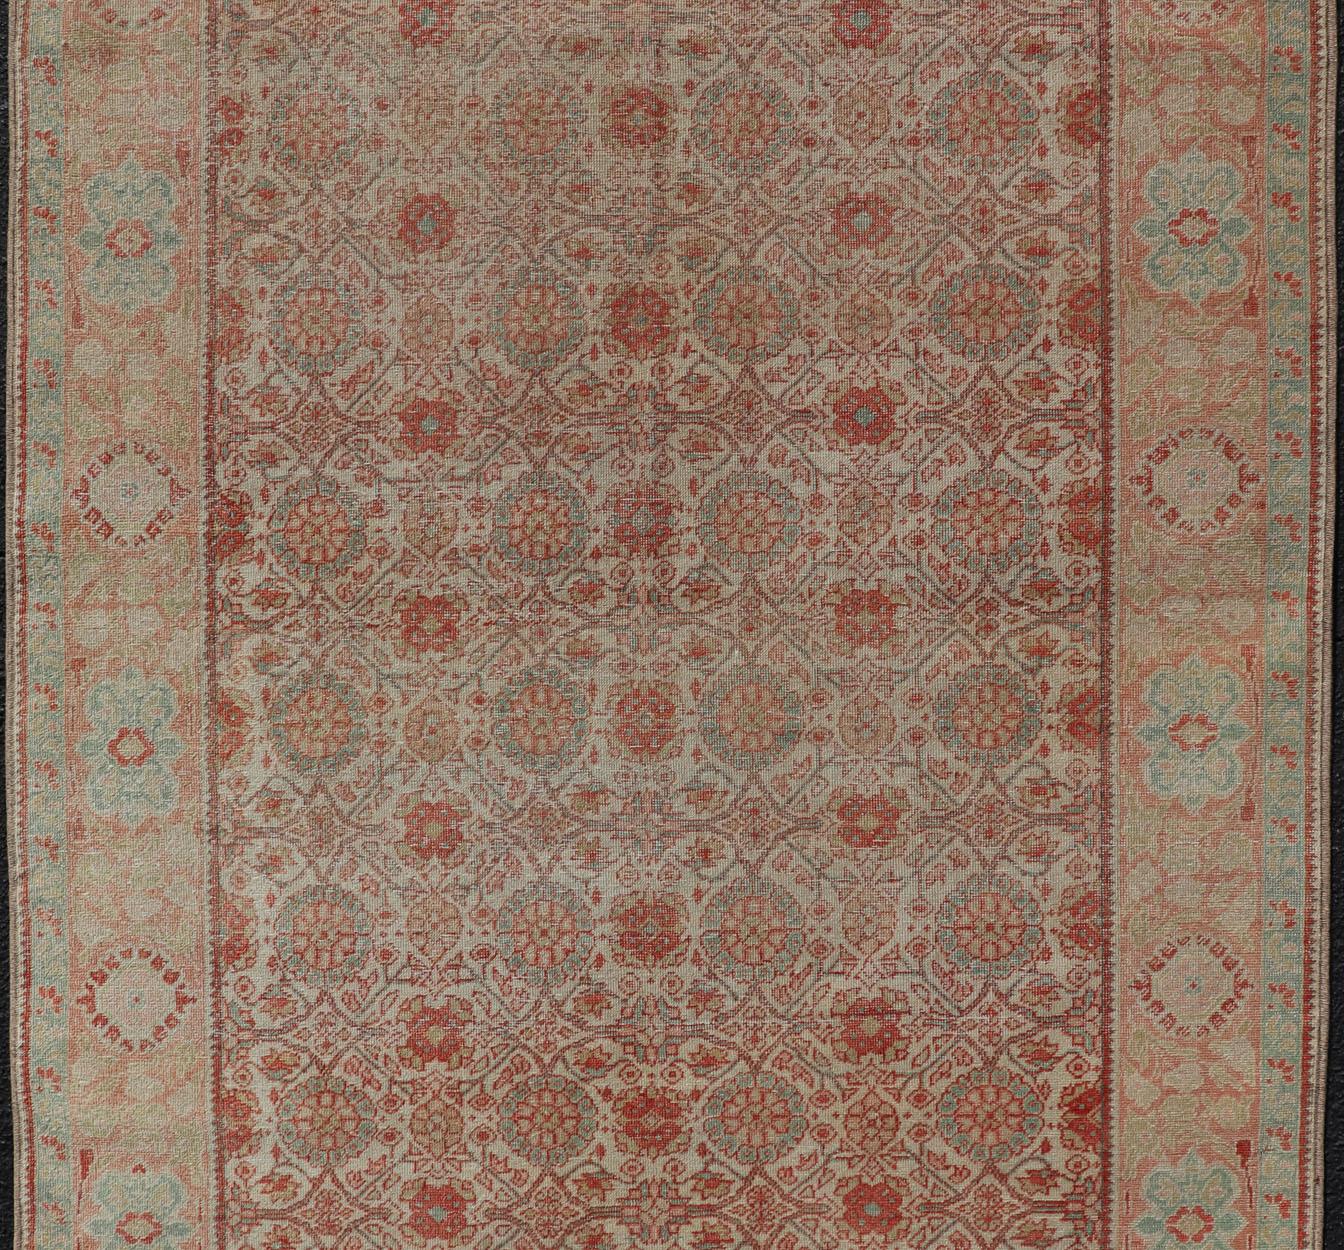 Hand-Knotted Persian Tabriz Rug with Boteh Design in Cream, Coral, Light Green/ Blue For Sale